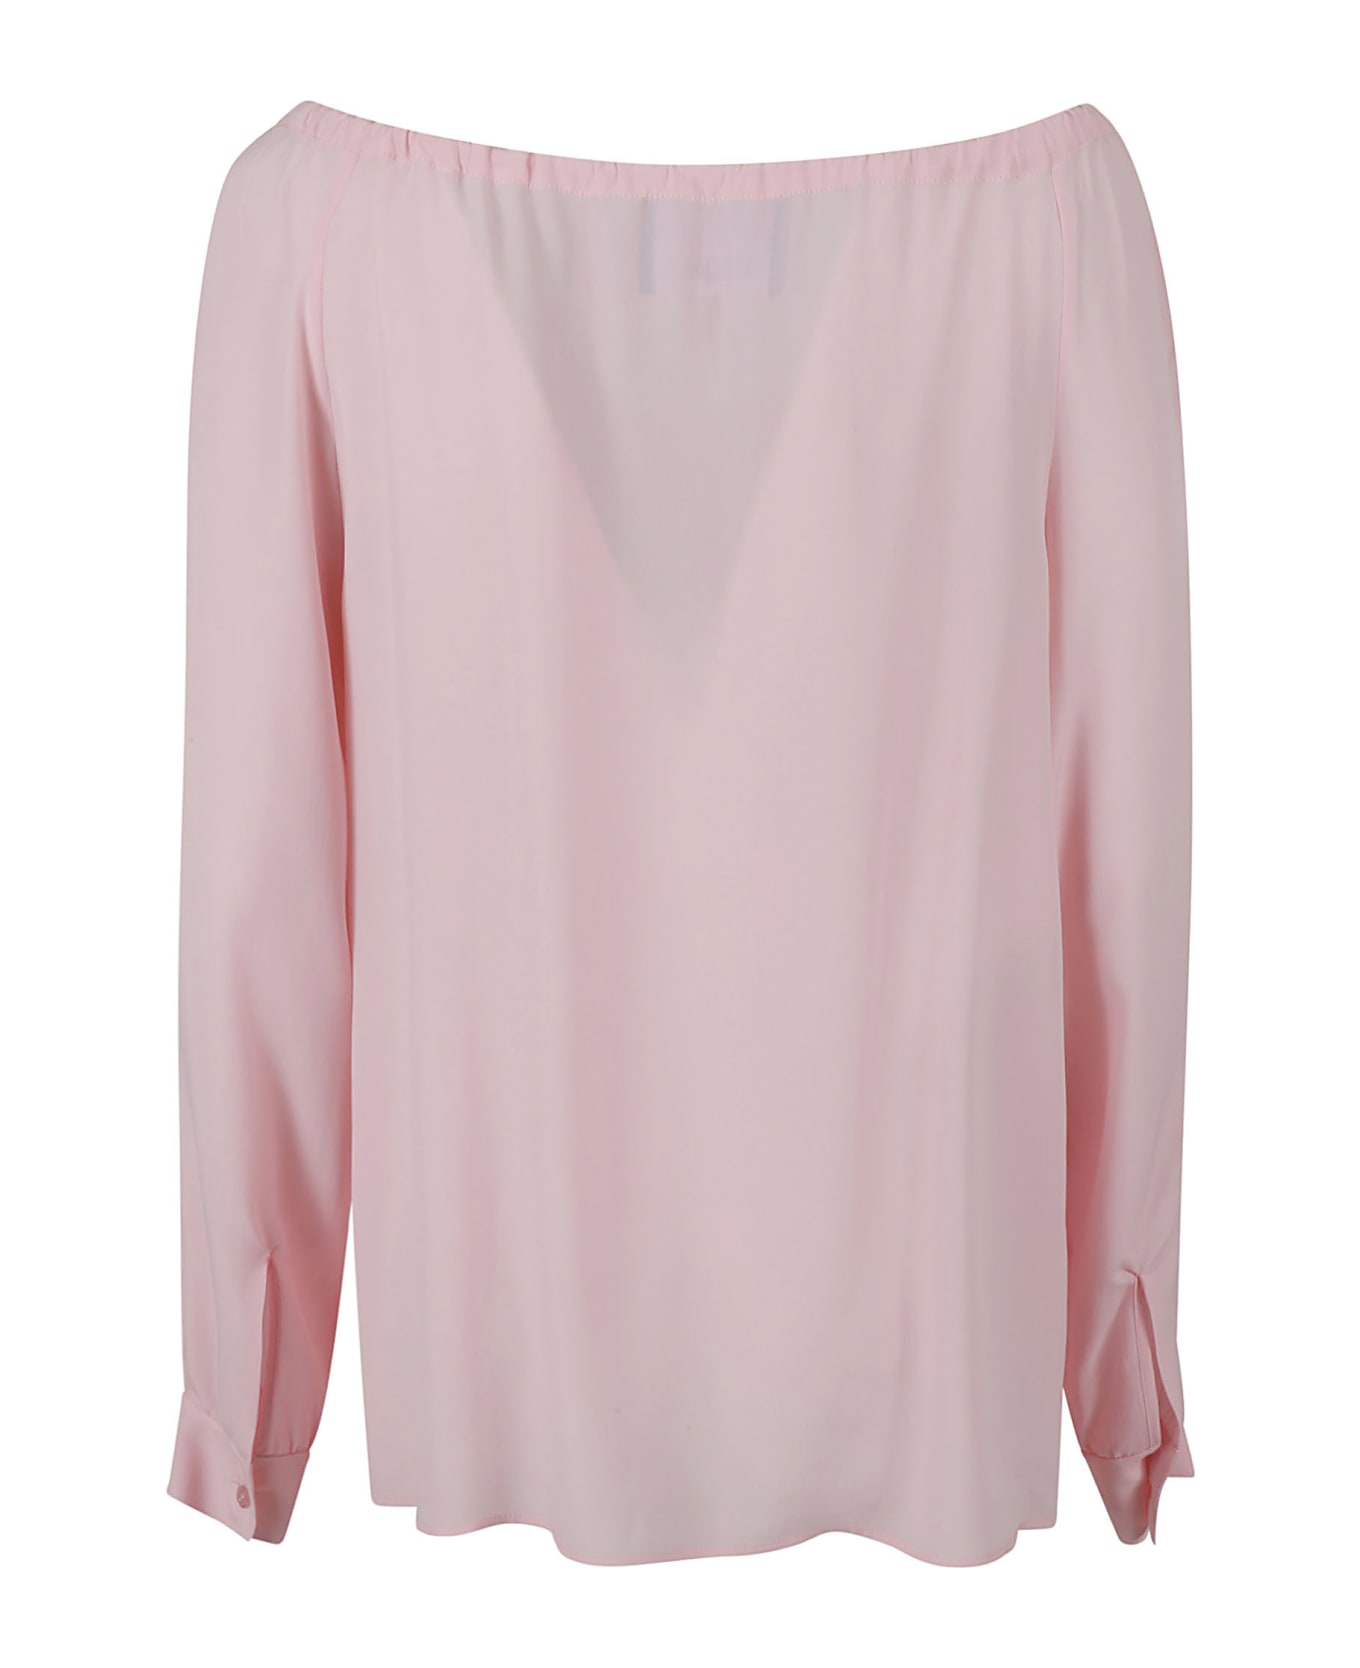 Boutique Moschino Off-shoulder Blouse - Pink ブラウス